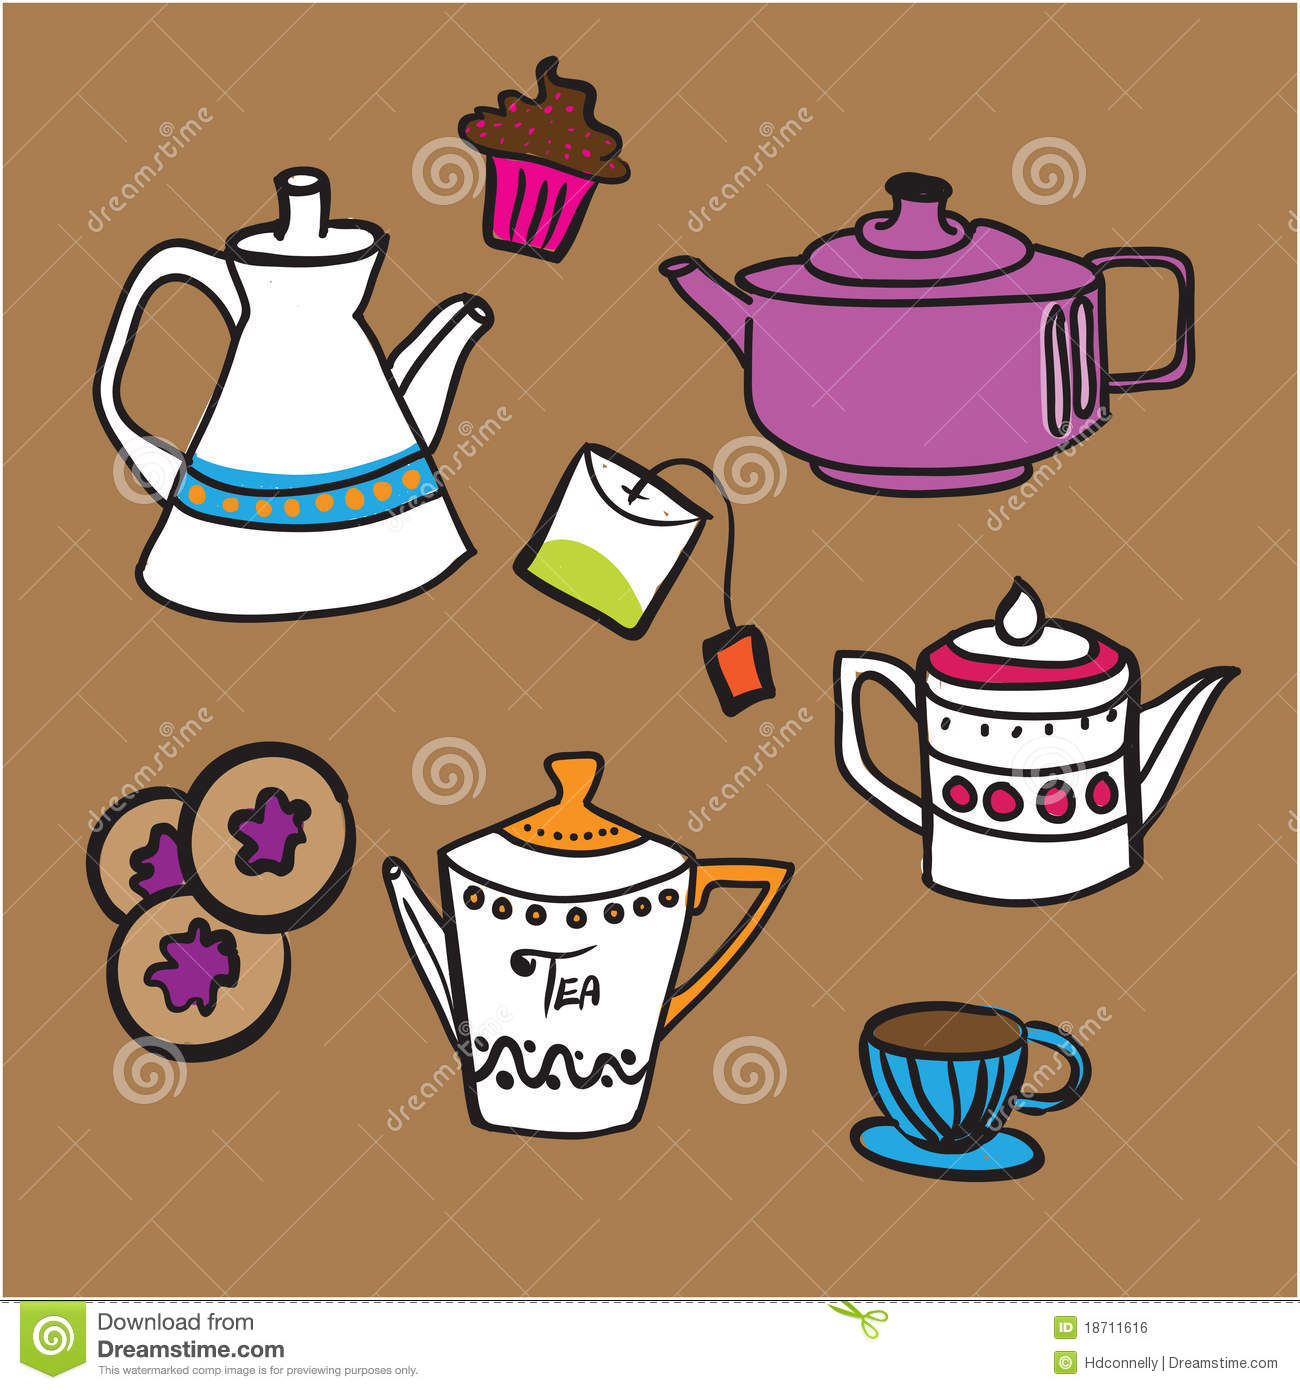 Tea And Cookies Royalty Free Stock Image   Image  18711616